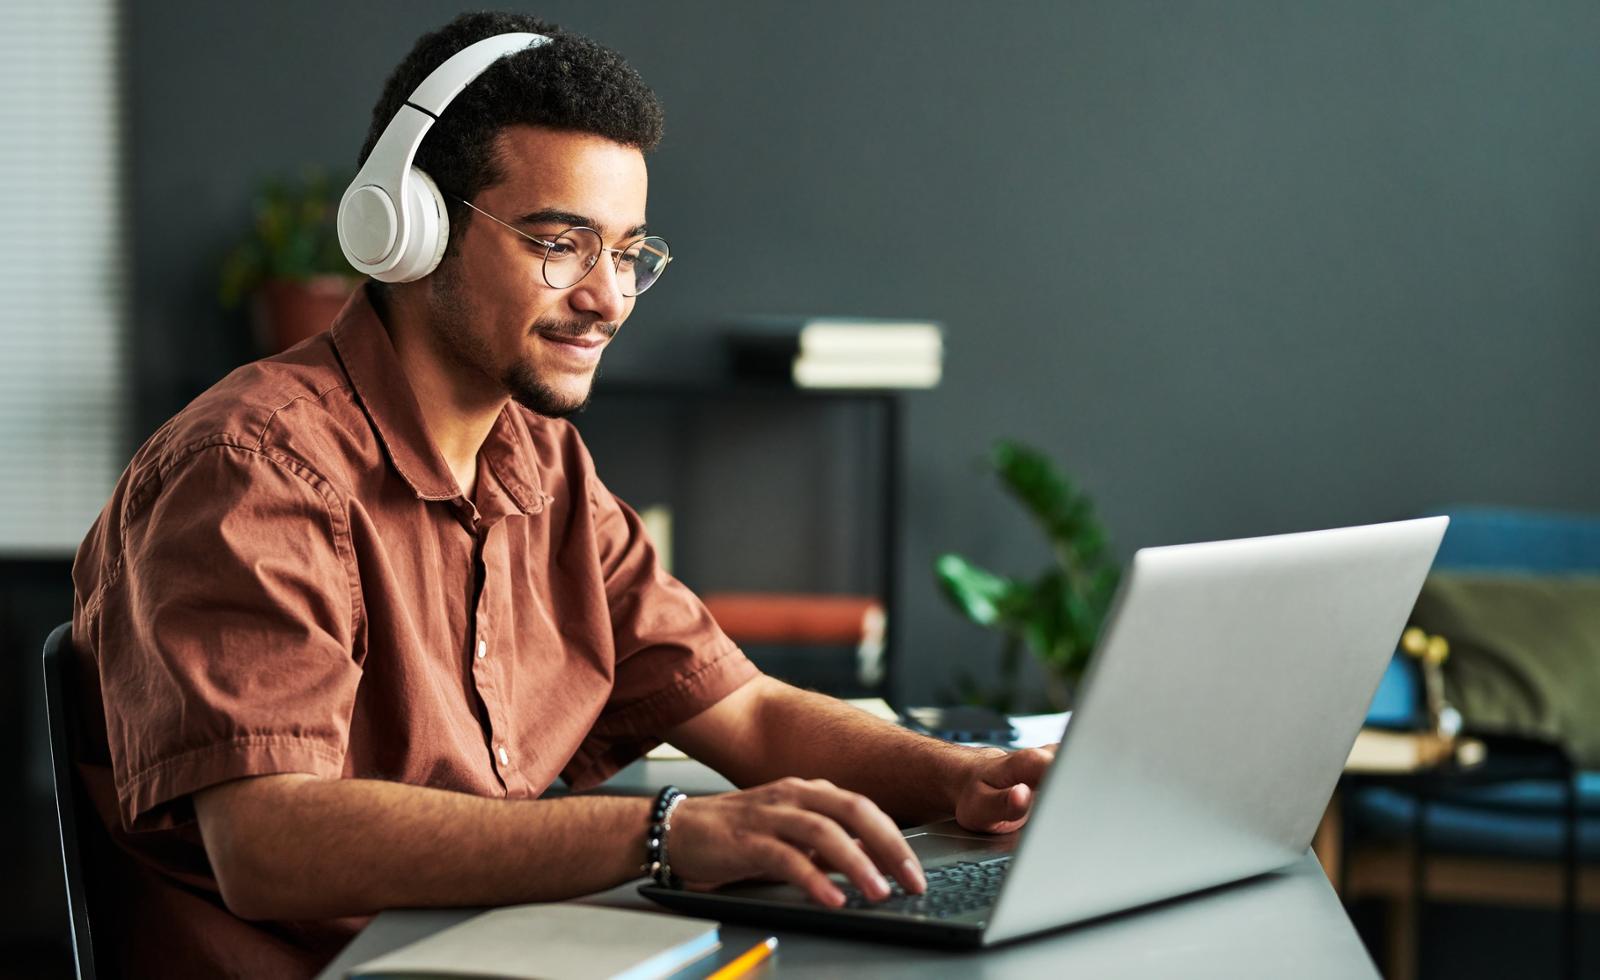 Individual sitting in front of a laptop with headphones on.